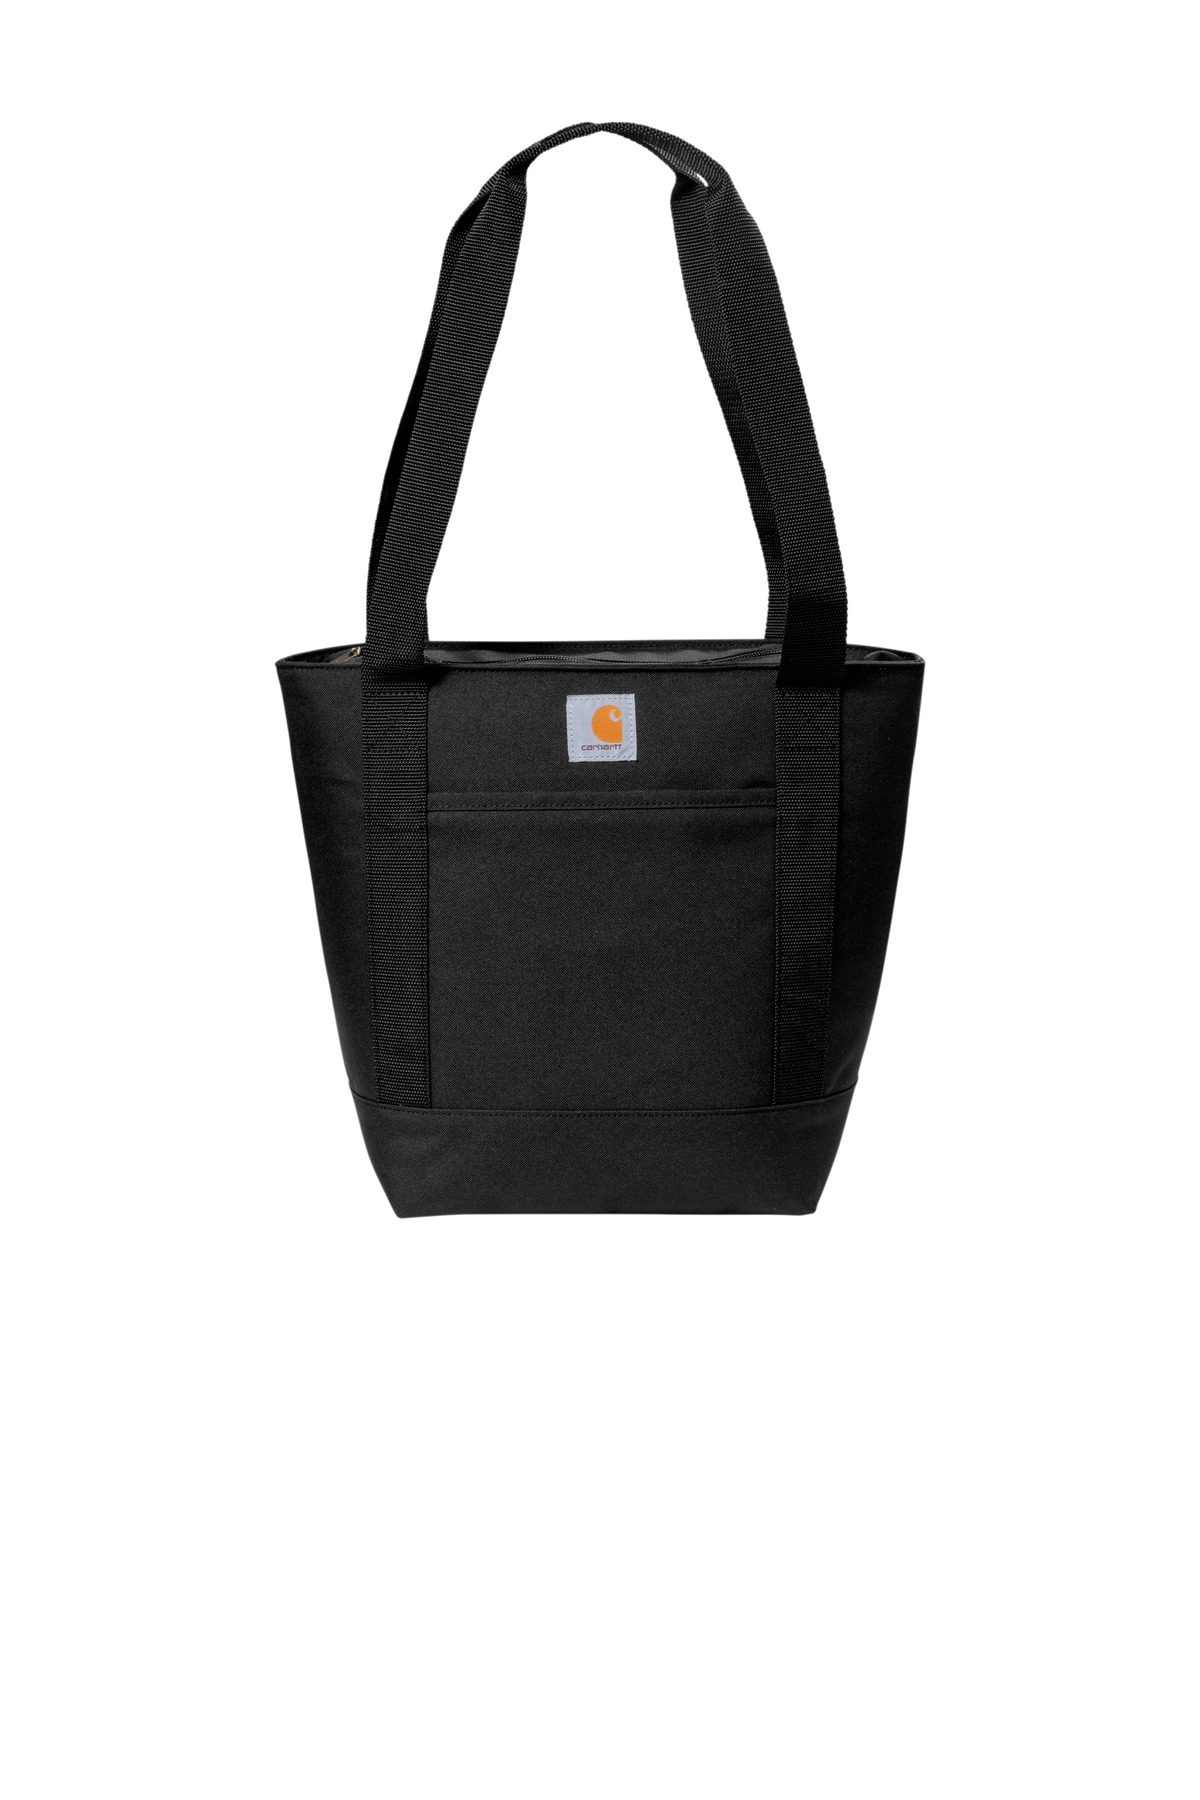 Carhartt  Tote 18-Can Cooler. CT89101701